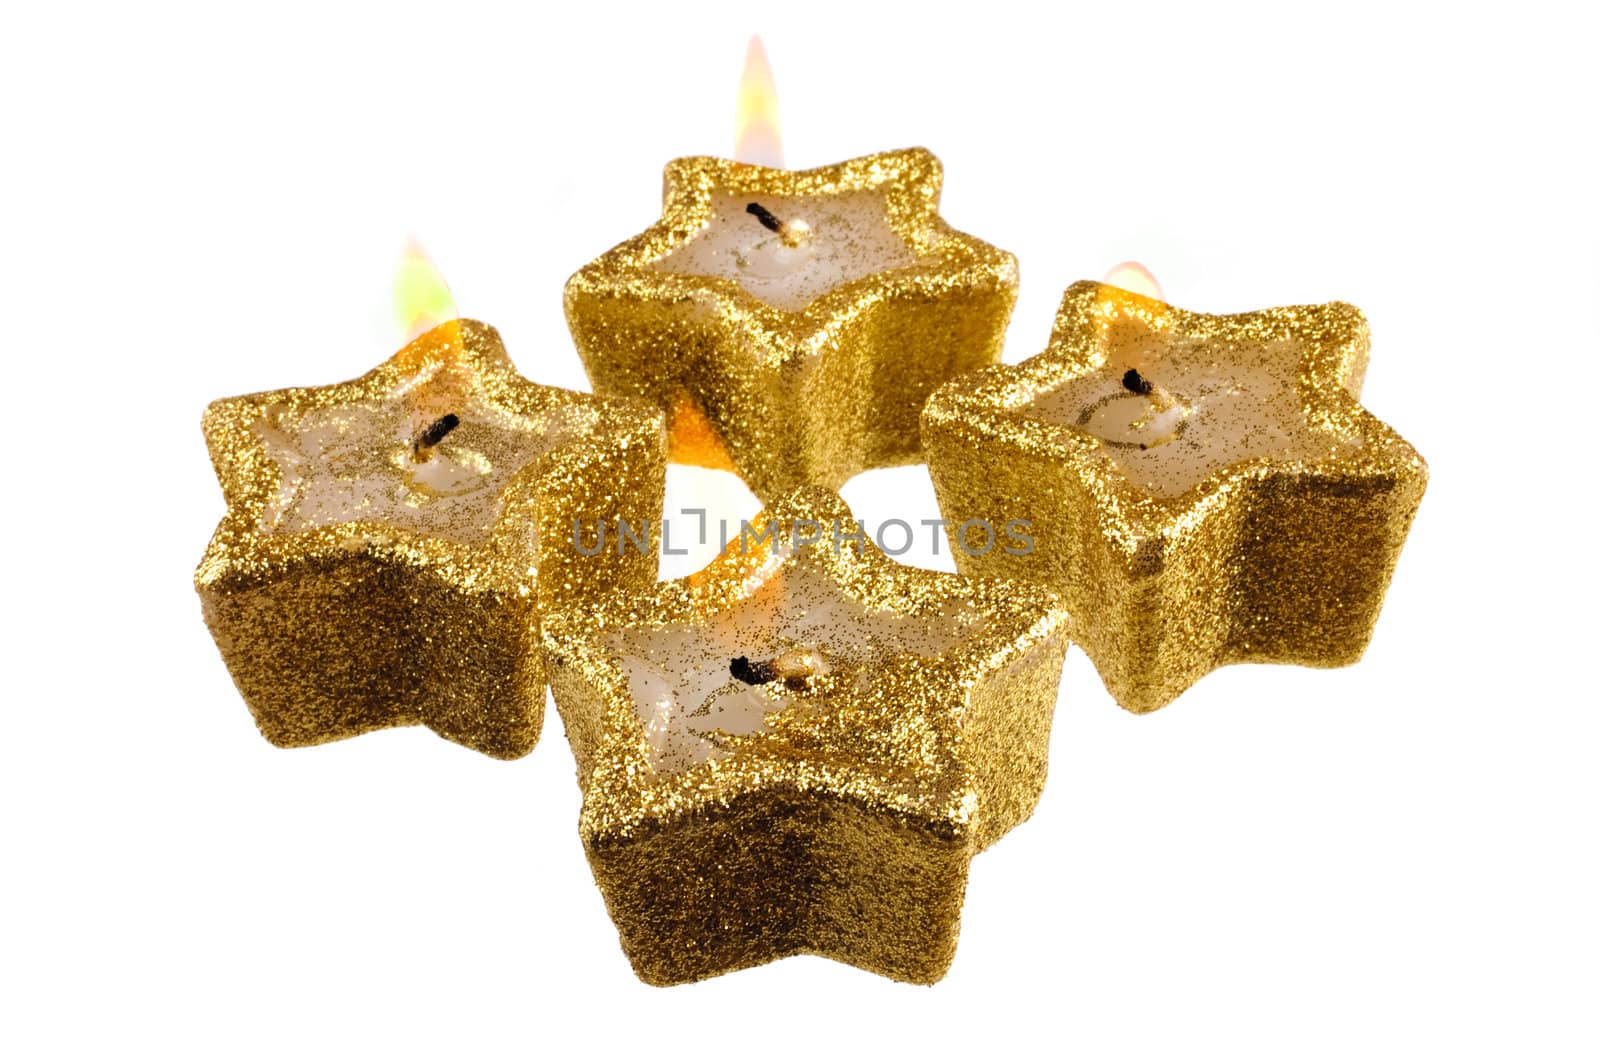 festive five pointed star candles burning on a white background